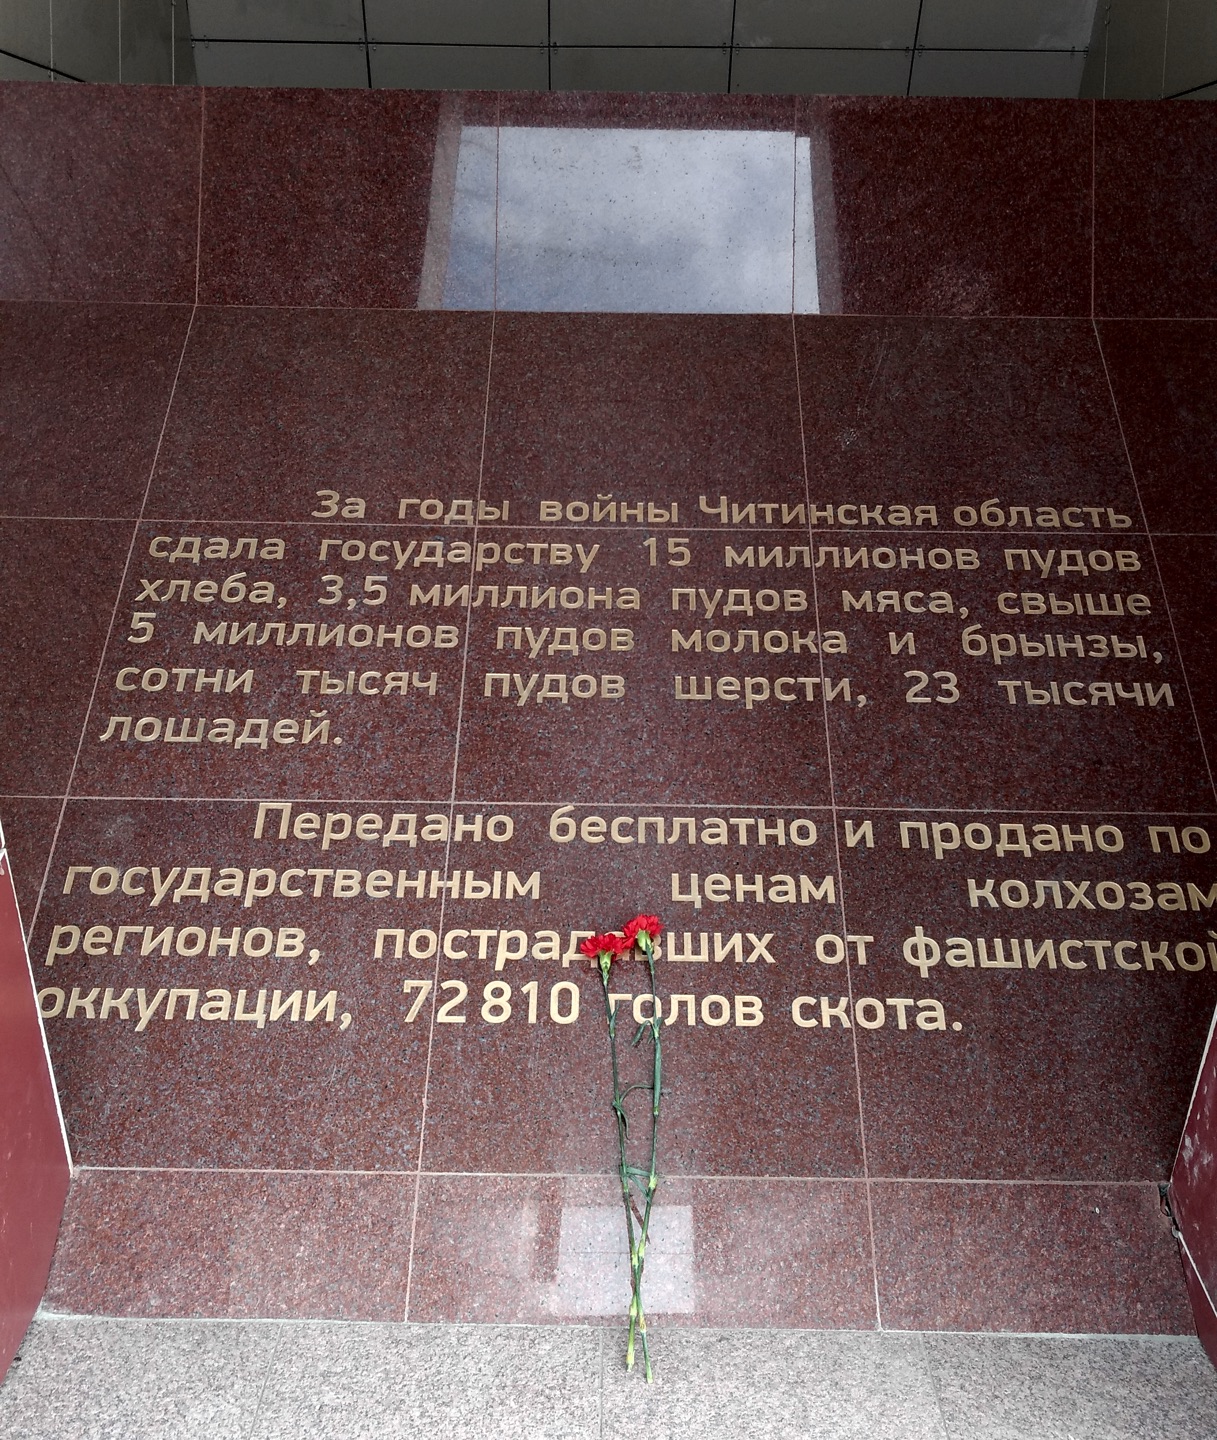 granite tablet with war statistics about Zabaikalye: During the war years, the Chita region handed over to the state 15 million poods of bread, 3.5 million poods of milk and cheese, hundreds of thousands of poods of wool, and 23,000 horses. Transmitted free of charge and sold at state prices to the state farms of the regions affected by the fascist occupation, 72,810 head of livestock.